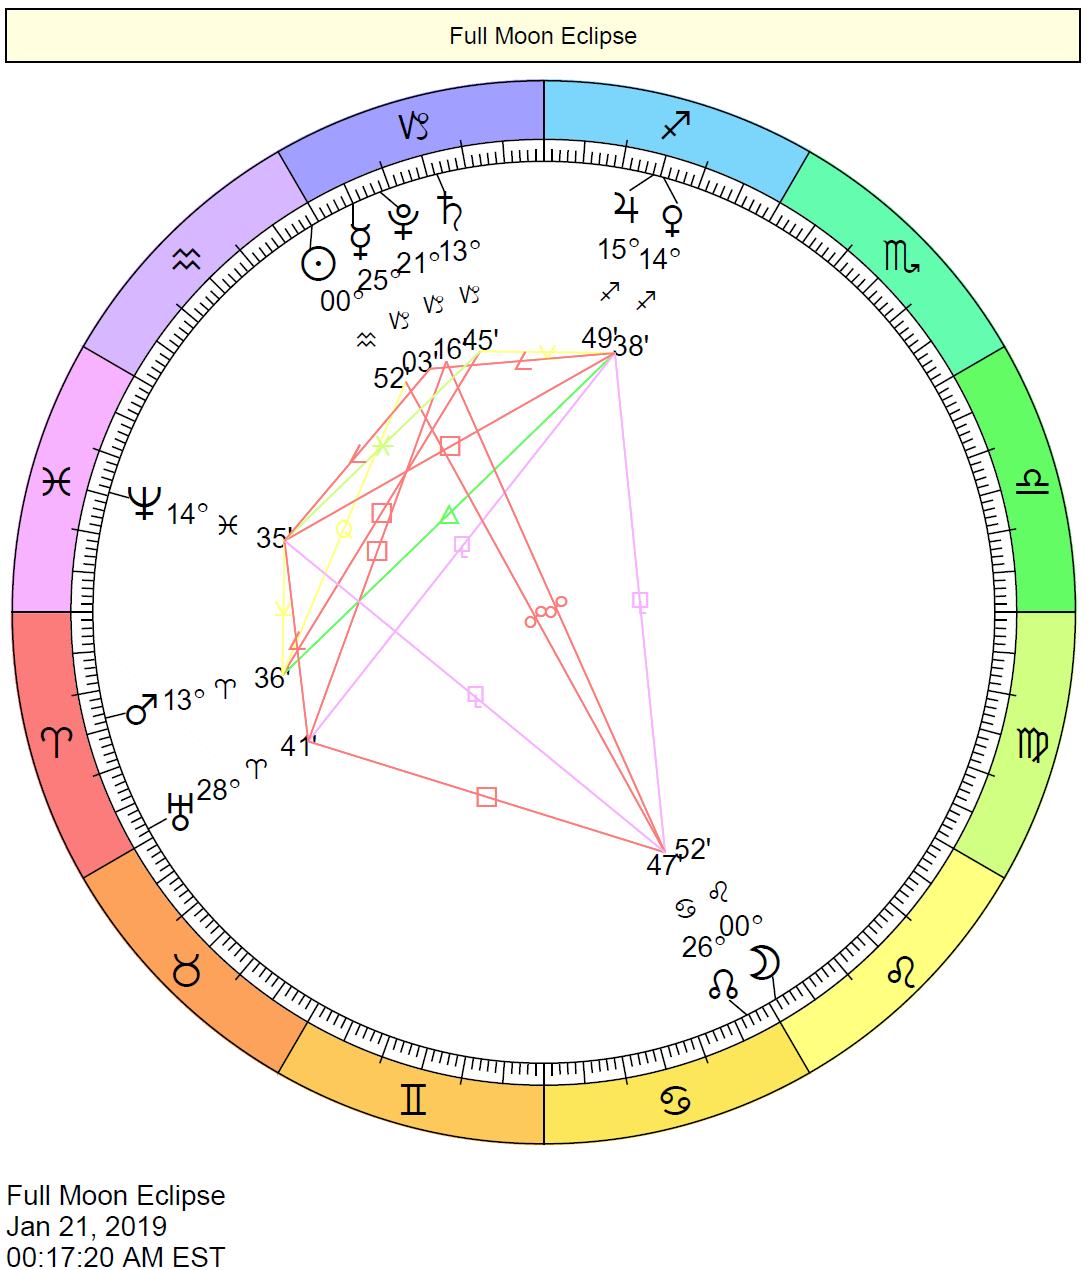 Lunar Eclipse/Full Moon in Leo Chart Wheel shows the Sun symbol opposite the Moon symbol